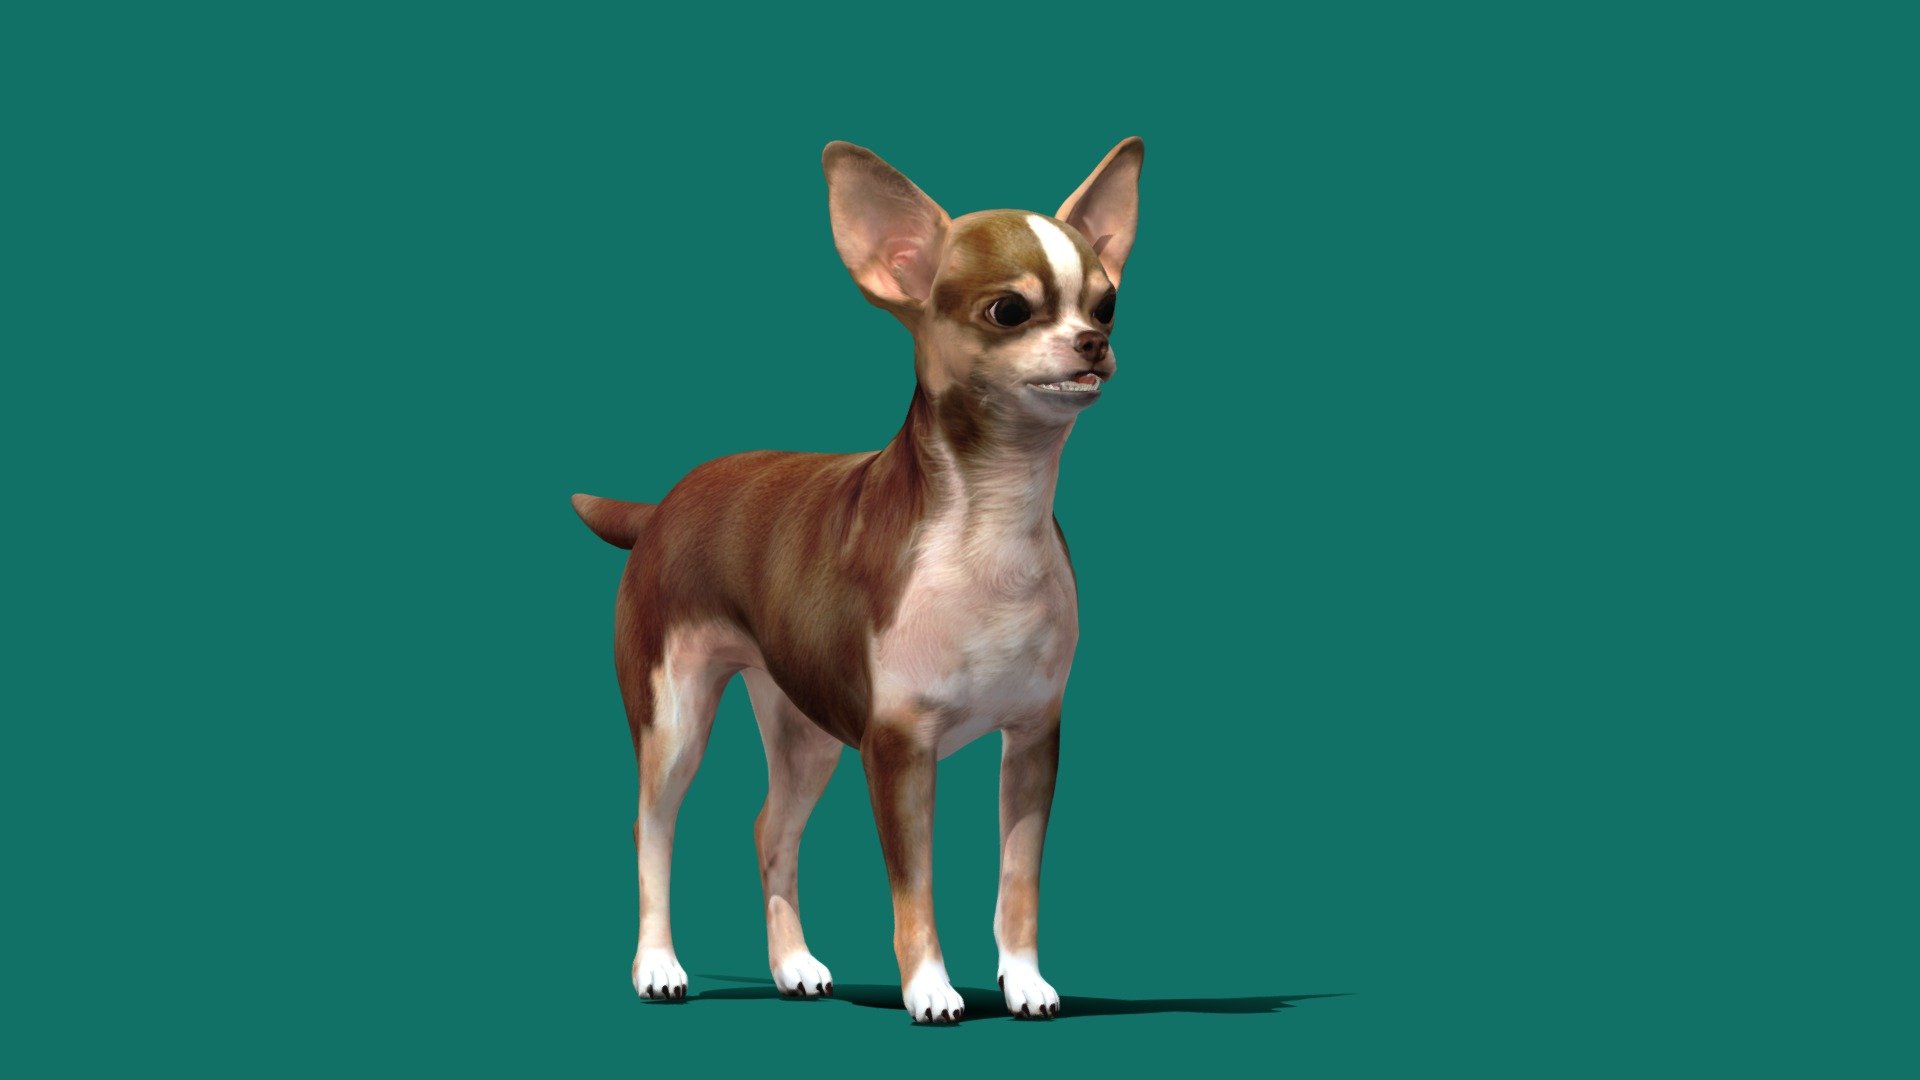 **Chihuahua Game Ready Dog
4K PBR Textures Materials
7 Animations
Unity Unreal Ready **



Diffuse Metallic AO Roughness Normal Map
The Chihuahua or Spanish: Chihuahueño is a Mexican breed of toy dog. It is named for the Mexican state of Chihuahua and is among the smallest of all dog breeds. It is usually kept as a companion animal or for showing.
Canis_lupus_familiaris - Chihuahua (Game Ready) - Buy Royalty Free 3D model by Nyilonelycompany 3d model